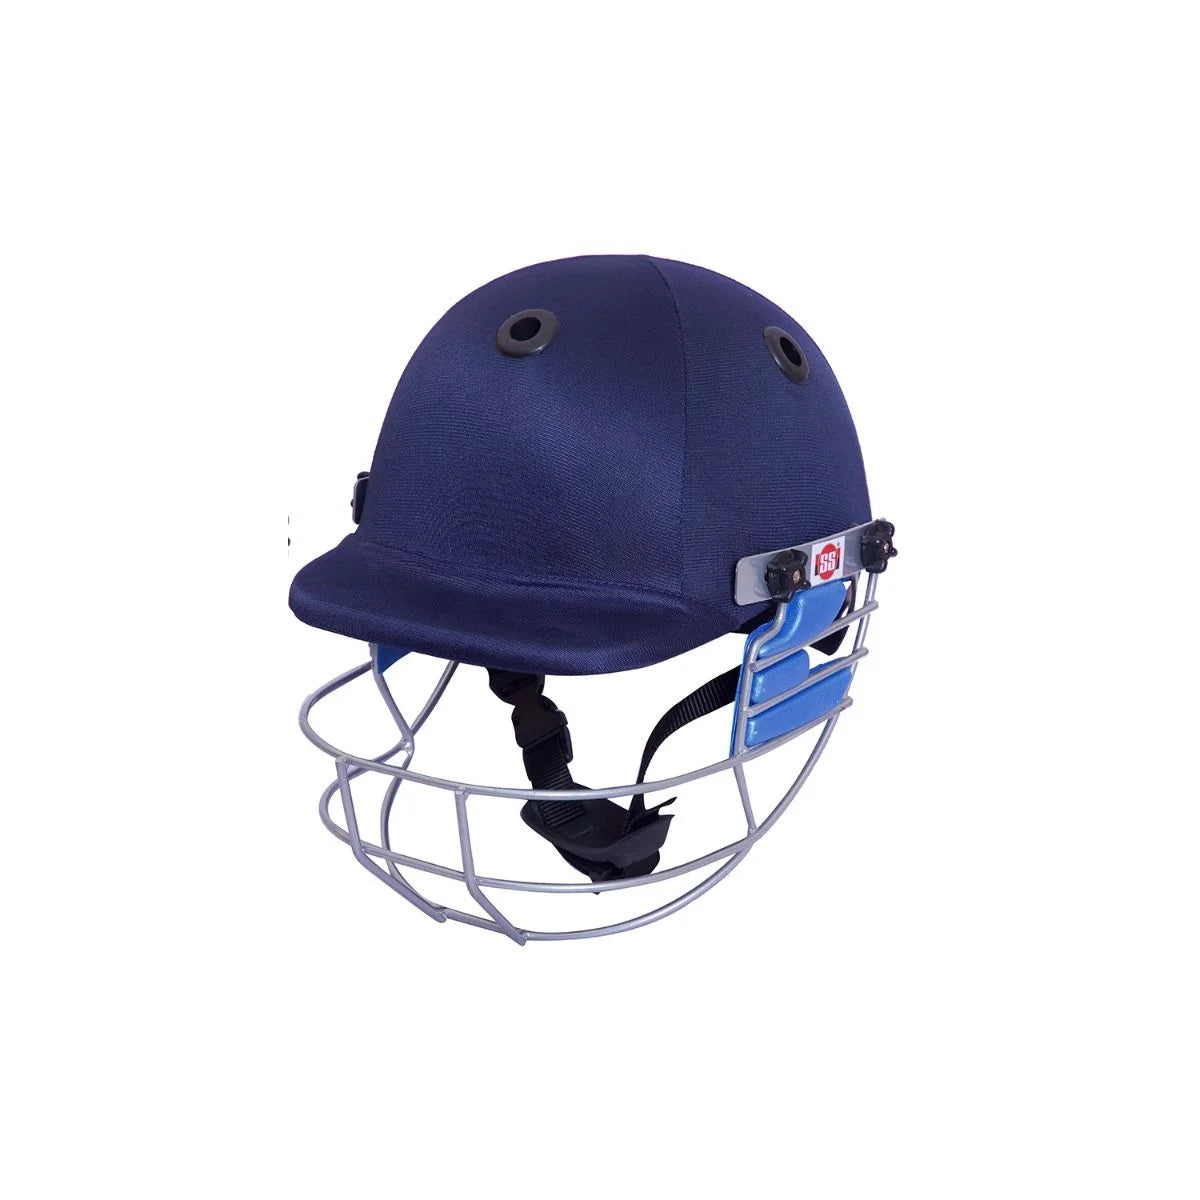 SS Matrix cricket helmet with an adjustable steel grill for superior protection, made from fiberglass with an innovative Air Flow cooling system for optimal ventilation, featuring easy adjustment nape straps for a comfortable and secure fit.